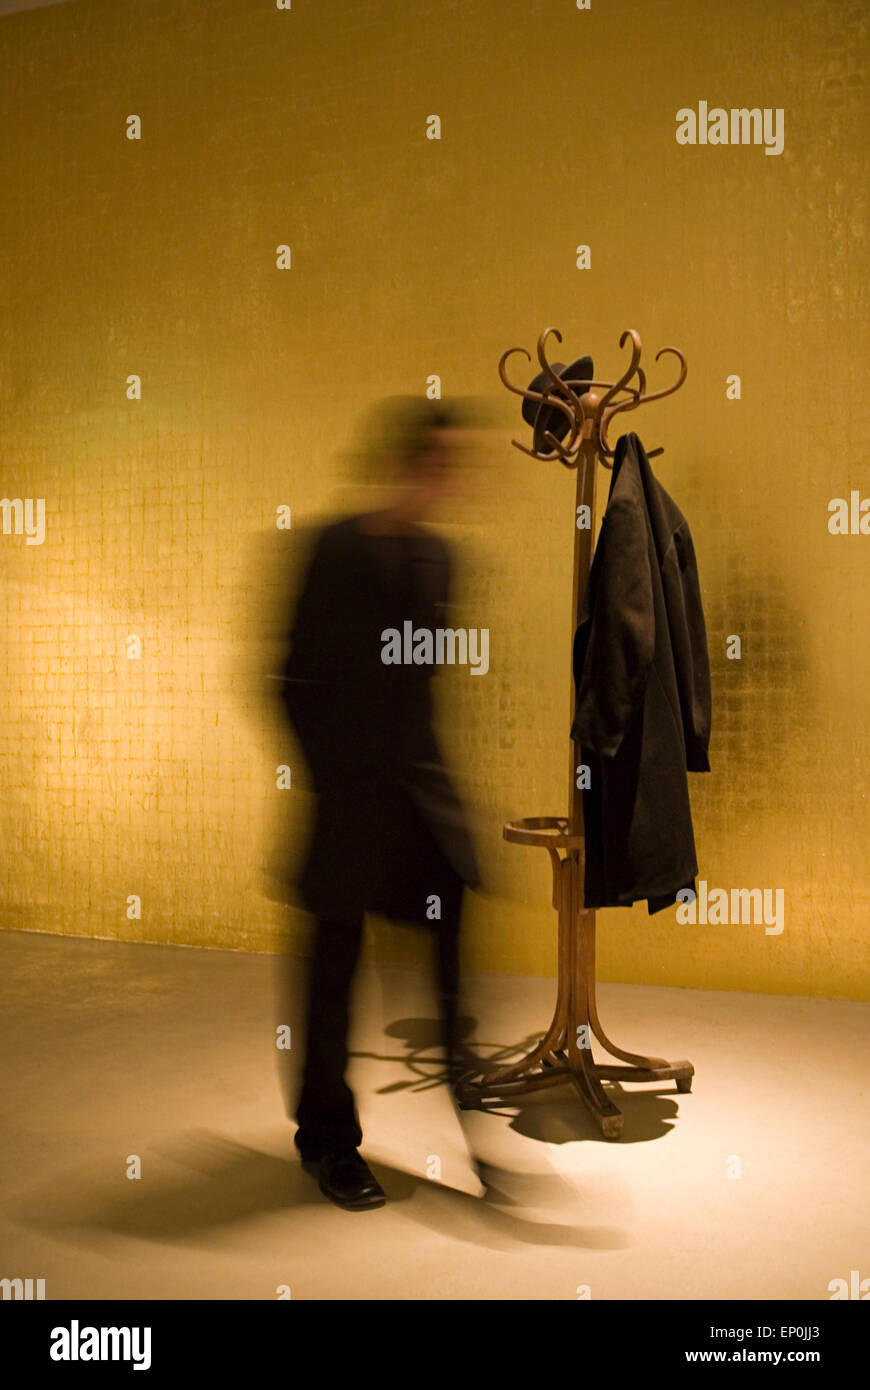 Man in motion blurred with coat stand with a jacket and a hat Germany Europe Stock Photo